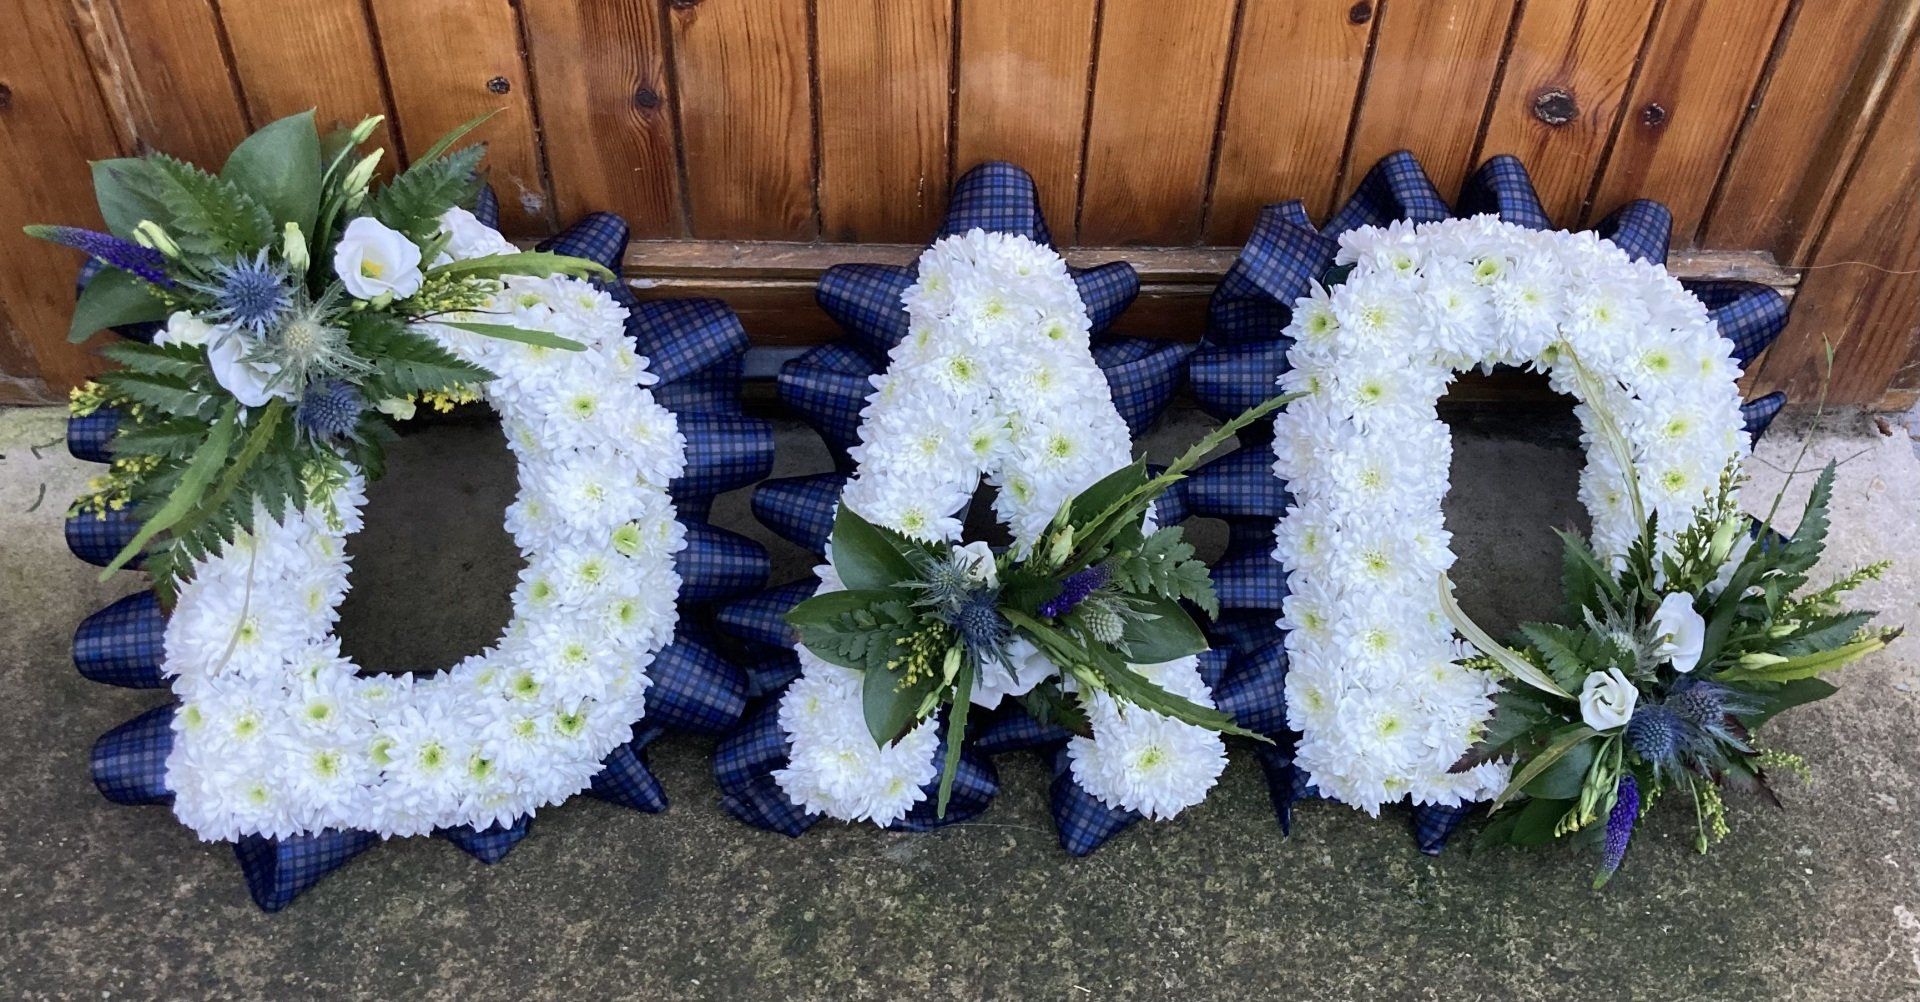 Funeral Letters created by  Rachel's Country flowers who is a specialist funeral florist situated in the Scottish Highlands. Covering Edderton, Tain, Seaboard Villages, Balintore, Hilton, Fearn, Portmahomack, Invergordon, Alness, Dornoch, Golspie, Ardgay, Lairg. Lettering casket sprays, sheafs, posies and wreaths